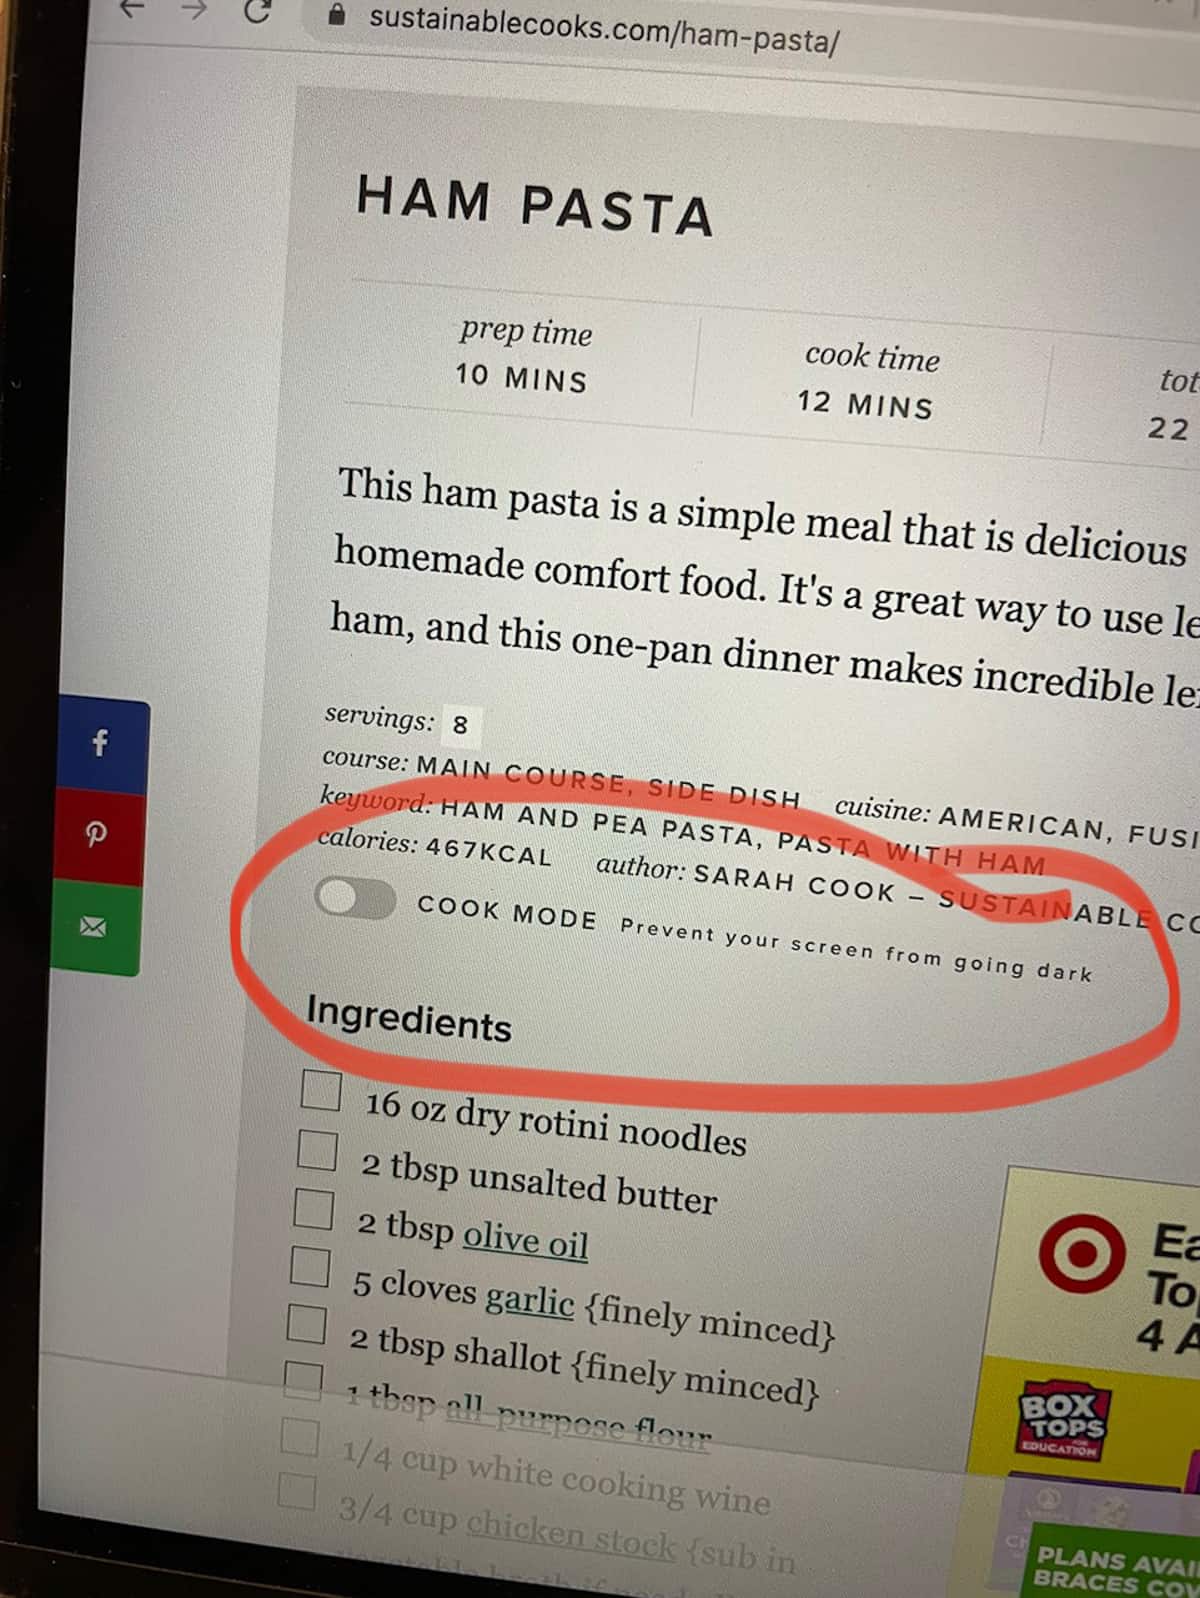 a screen shot of a website with a red circle around text that says "cook mode".